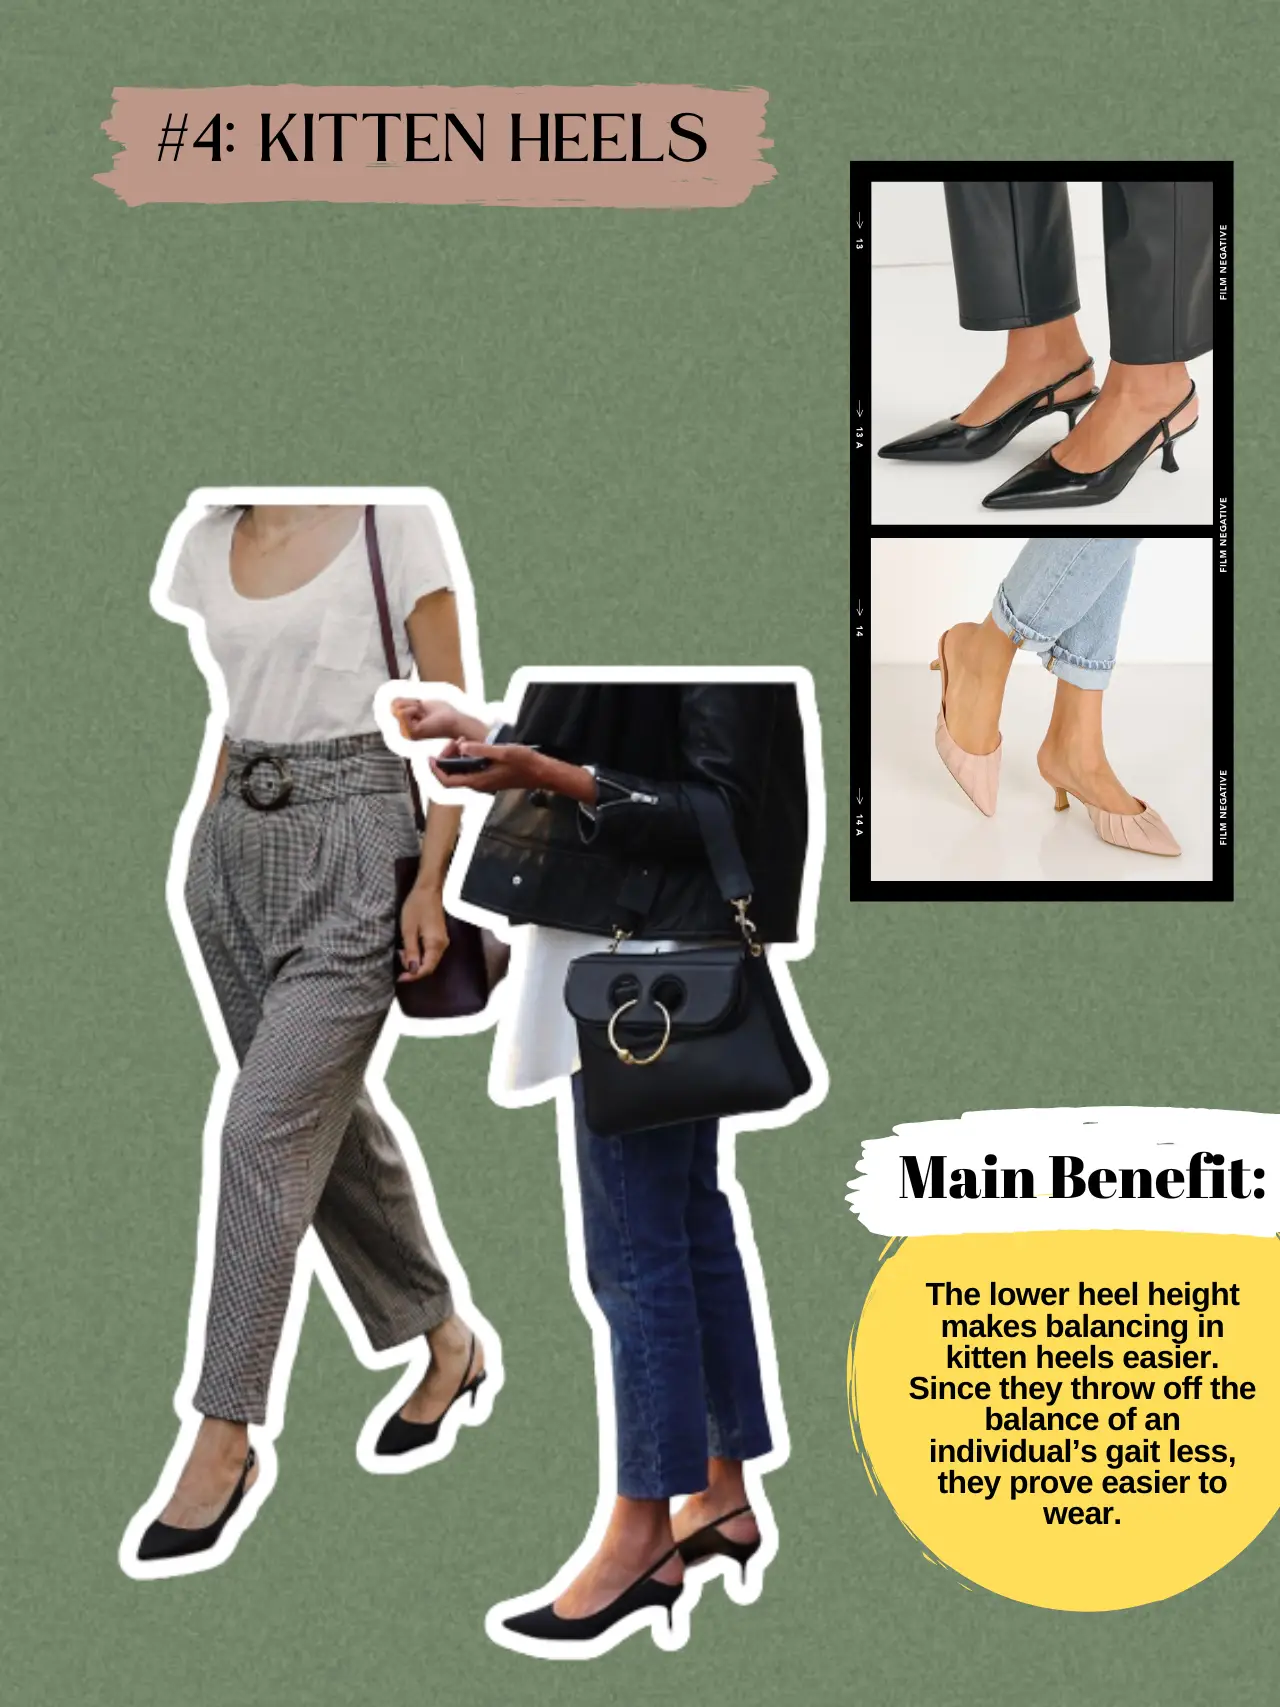 A Guide To Find The Right Heels: Plus-Size Edition, Galeri disiarkan oleh  courteneyjs